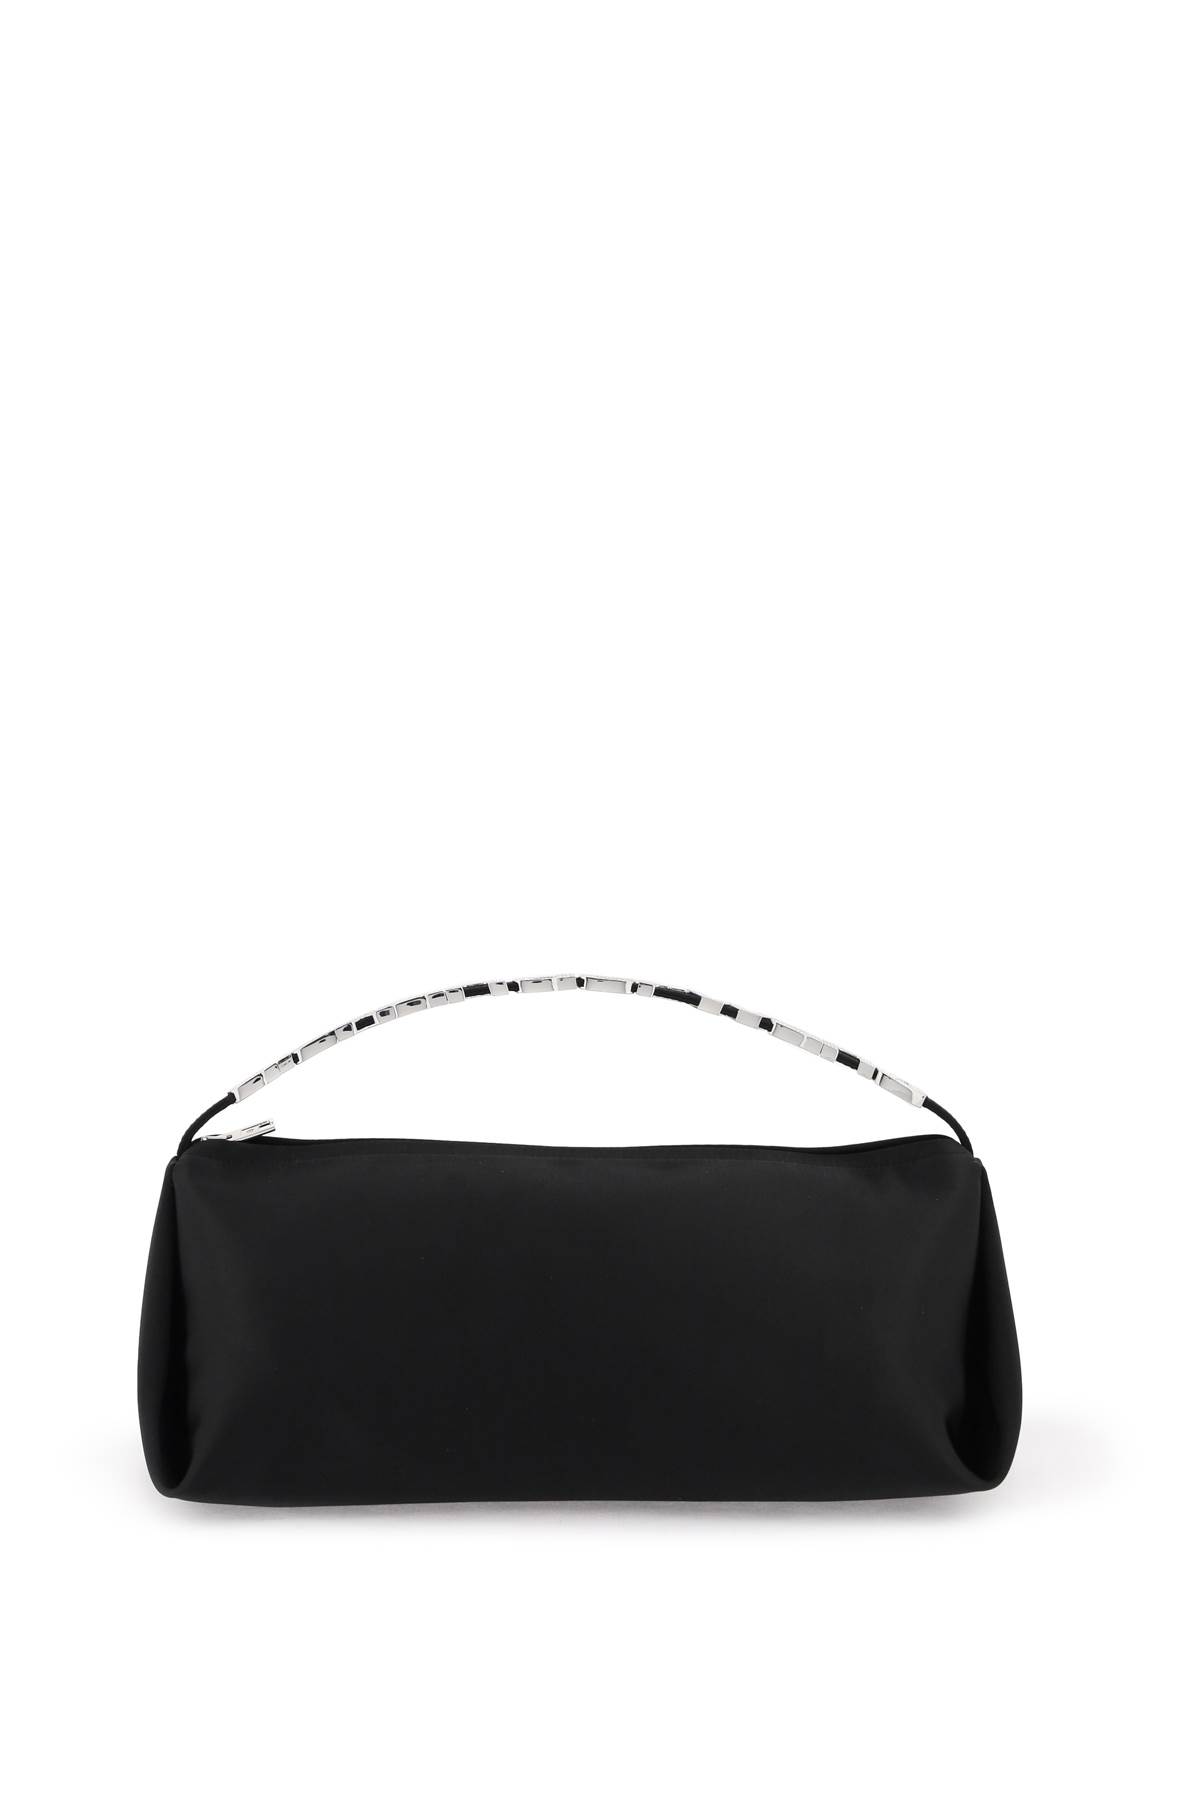 Alexander Wang Large Marques Bag - Black - female - Size: 0one size